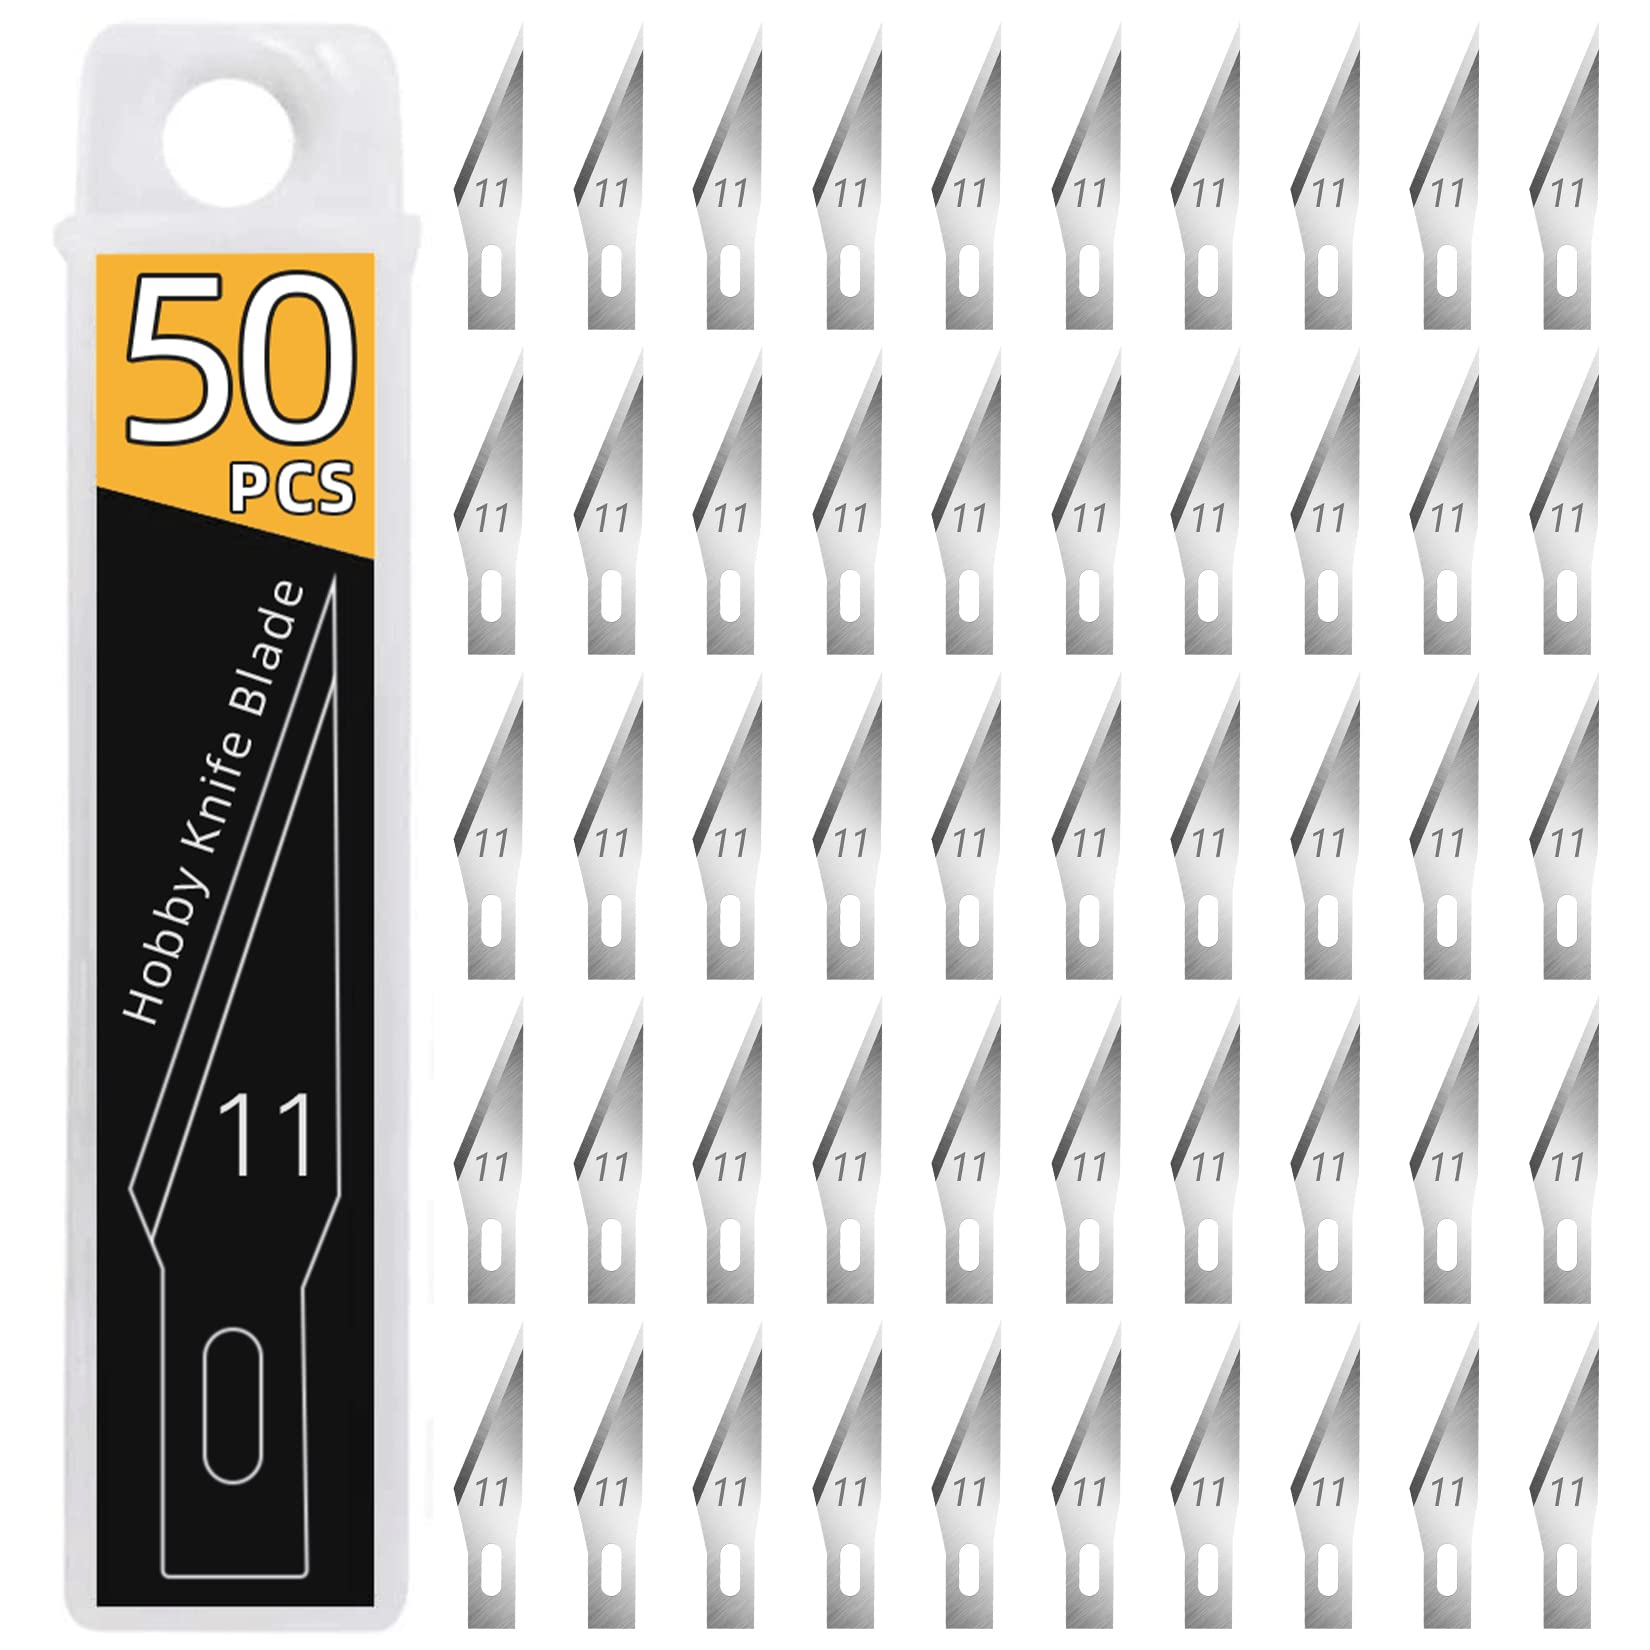 50pcs Utility Knife Razor Blade Refill Replacement Double Sided Blades